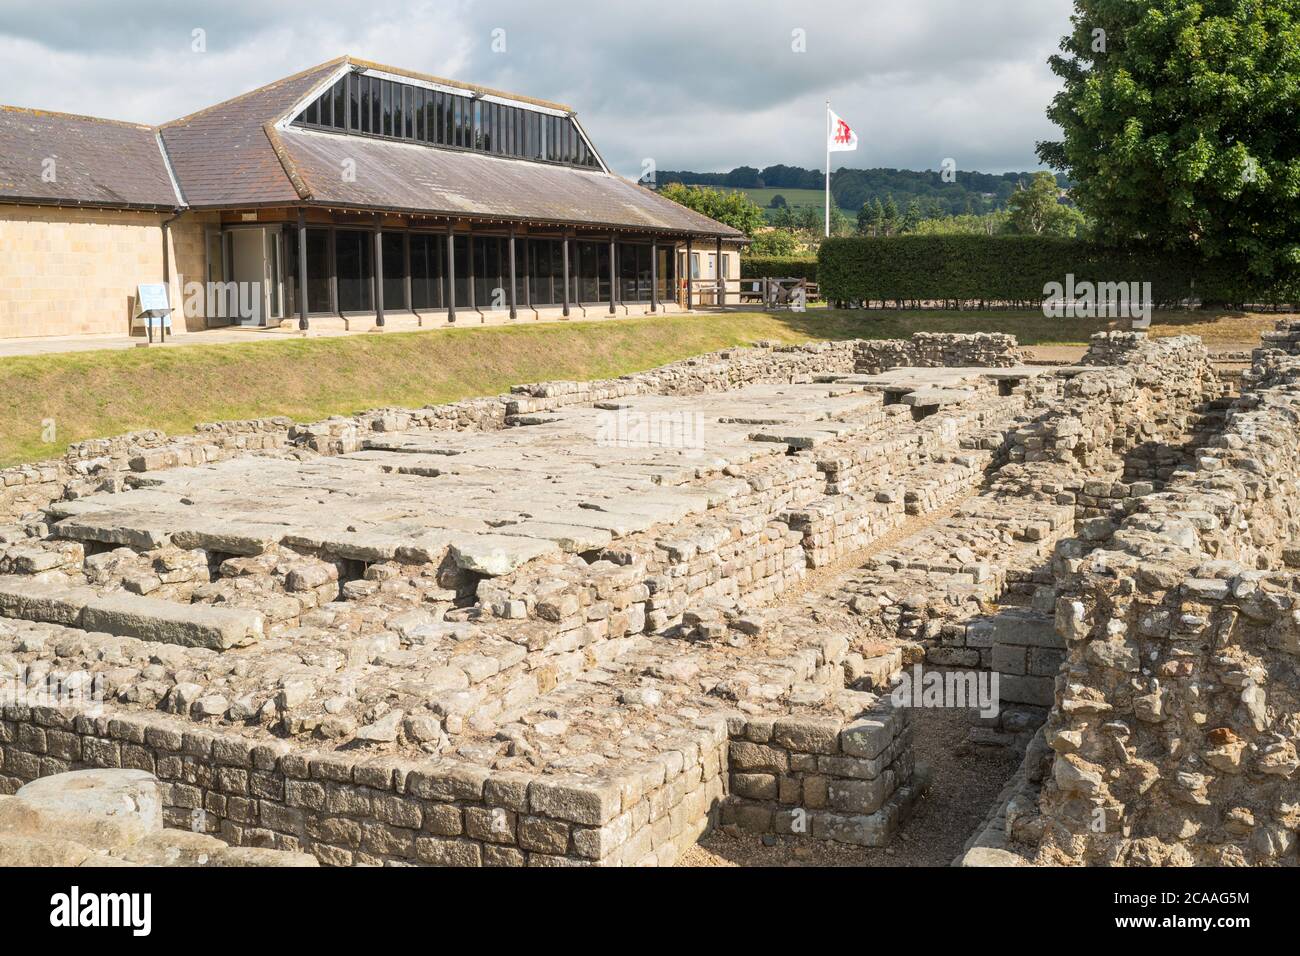 Remains of the Roman fort with the museum building behind in Corbridge, Northumberland, England, UK Stock Photo